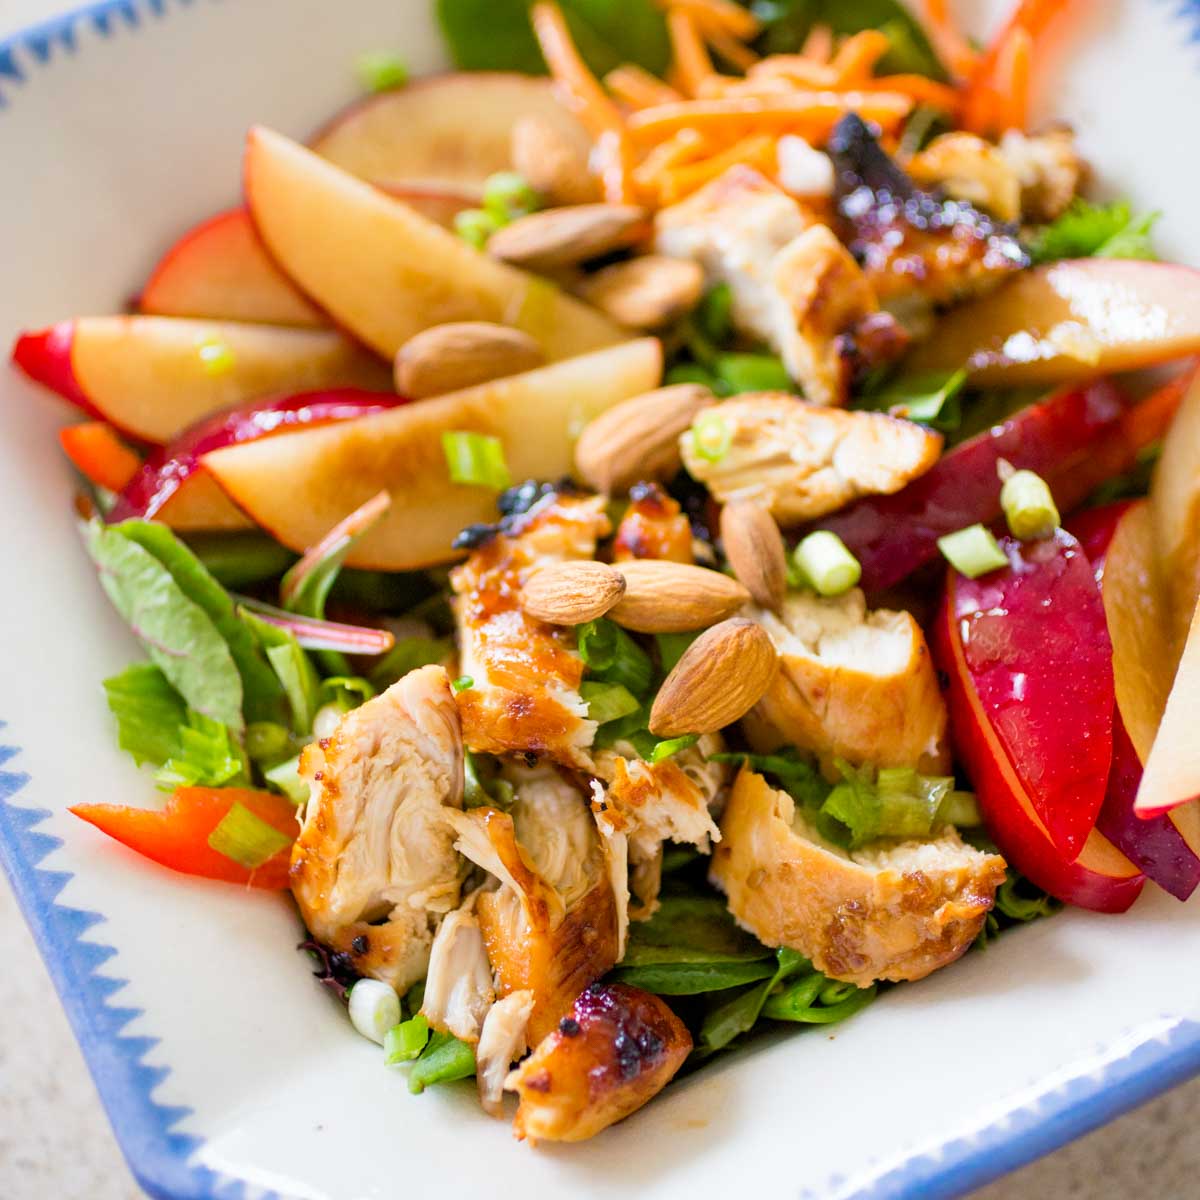 A salad with chicken, plums, carrots, and a drizzle of asian lime vinaigrette.